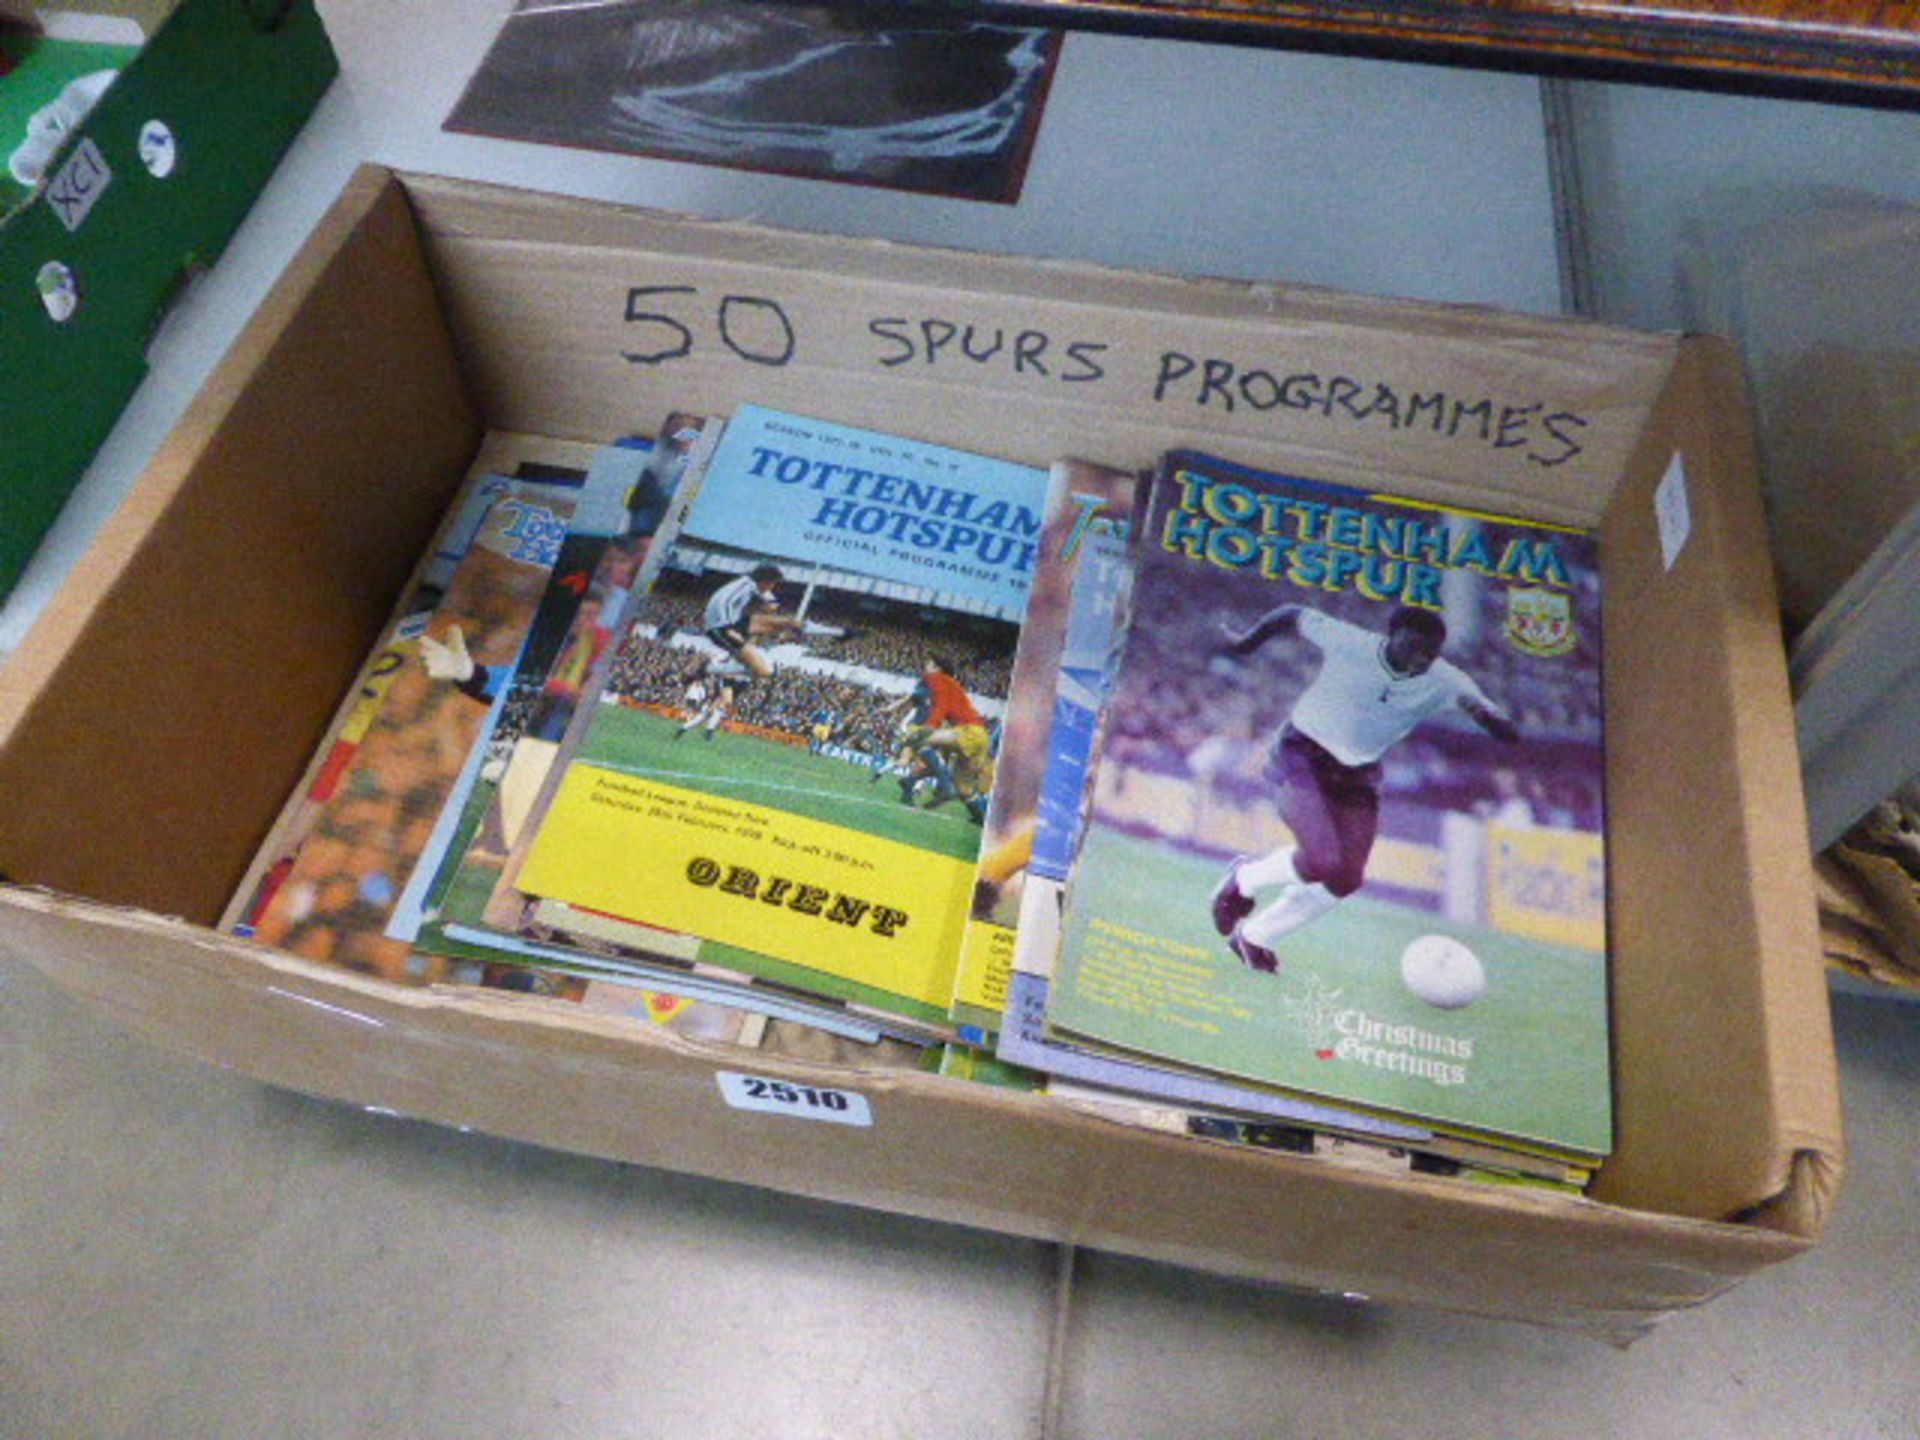 Approx. 50 Spurs programs and match day memorabilia